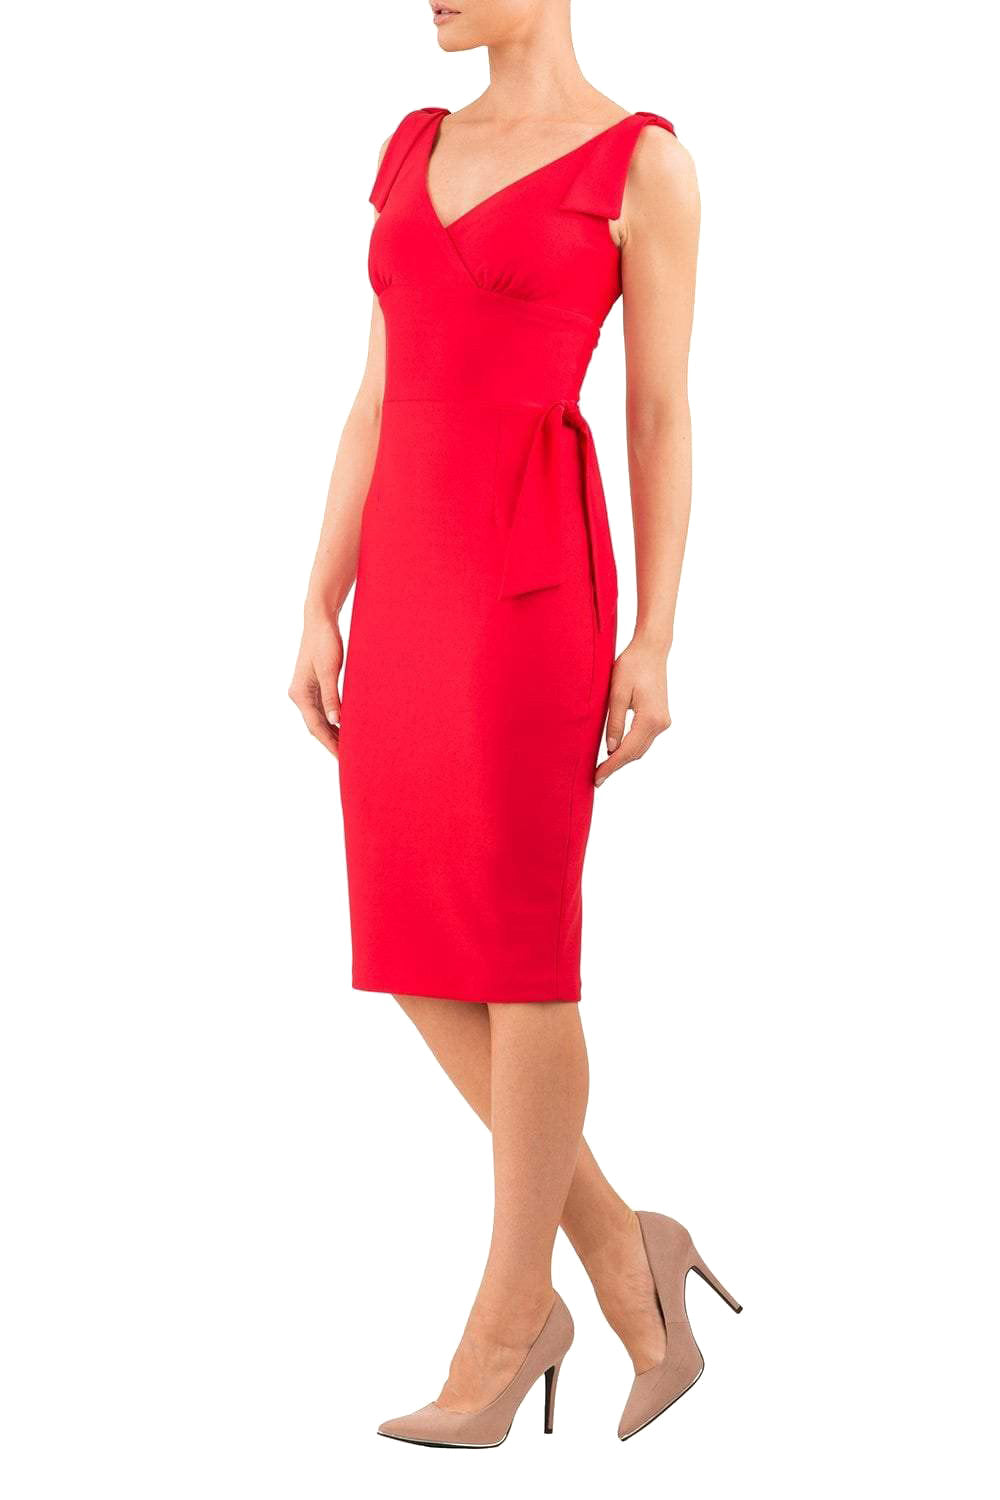 Model wearing diva catwalk Malvern Sleeveless  Pencil Wiggle Dress with tie detail at waist and shoulders in Electric Red colour side front